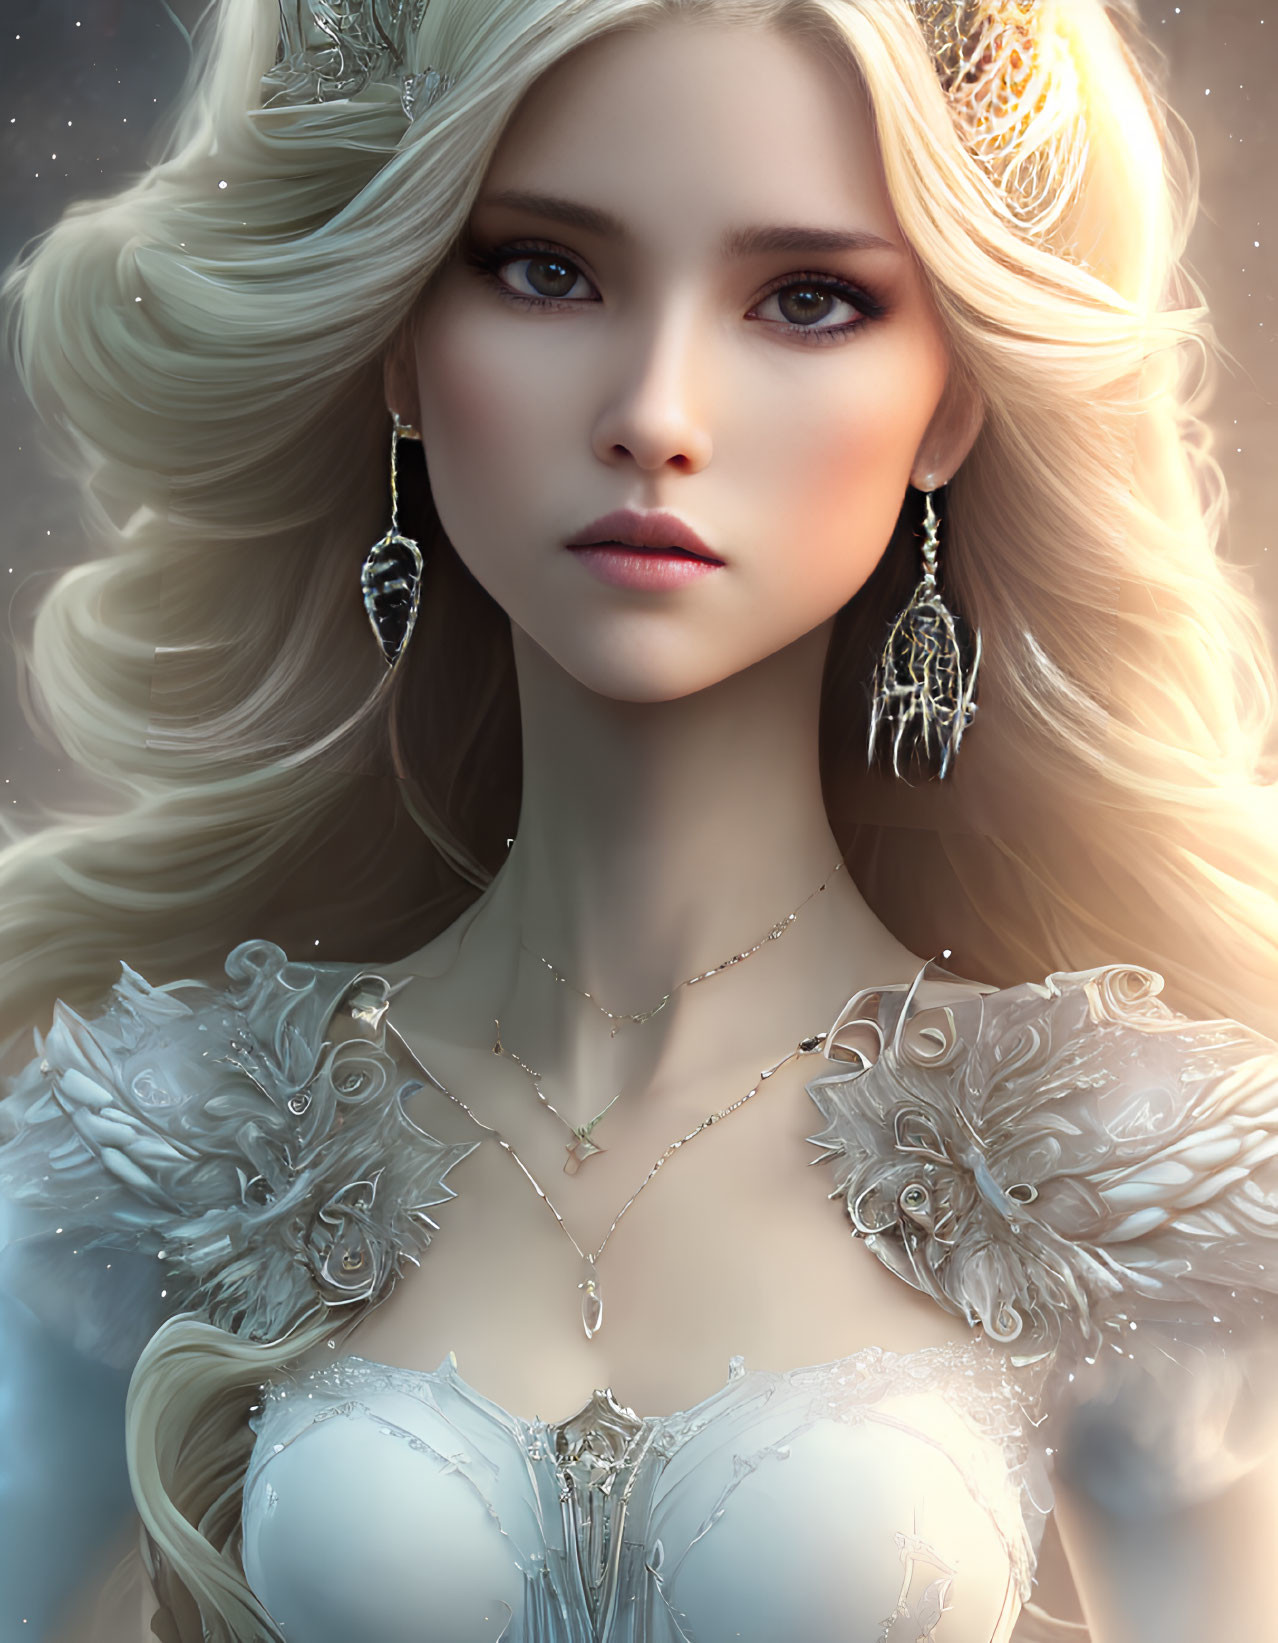 Digital artwork: Woman with long blonde hair, intricate jewelry, and ornate dress.